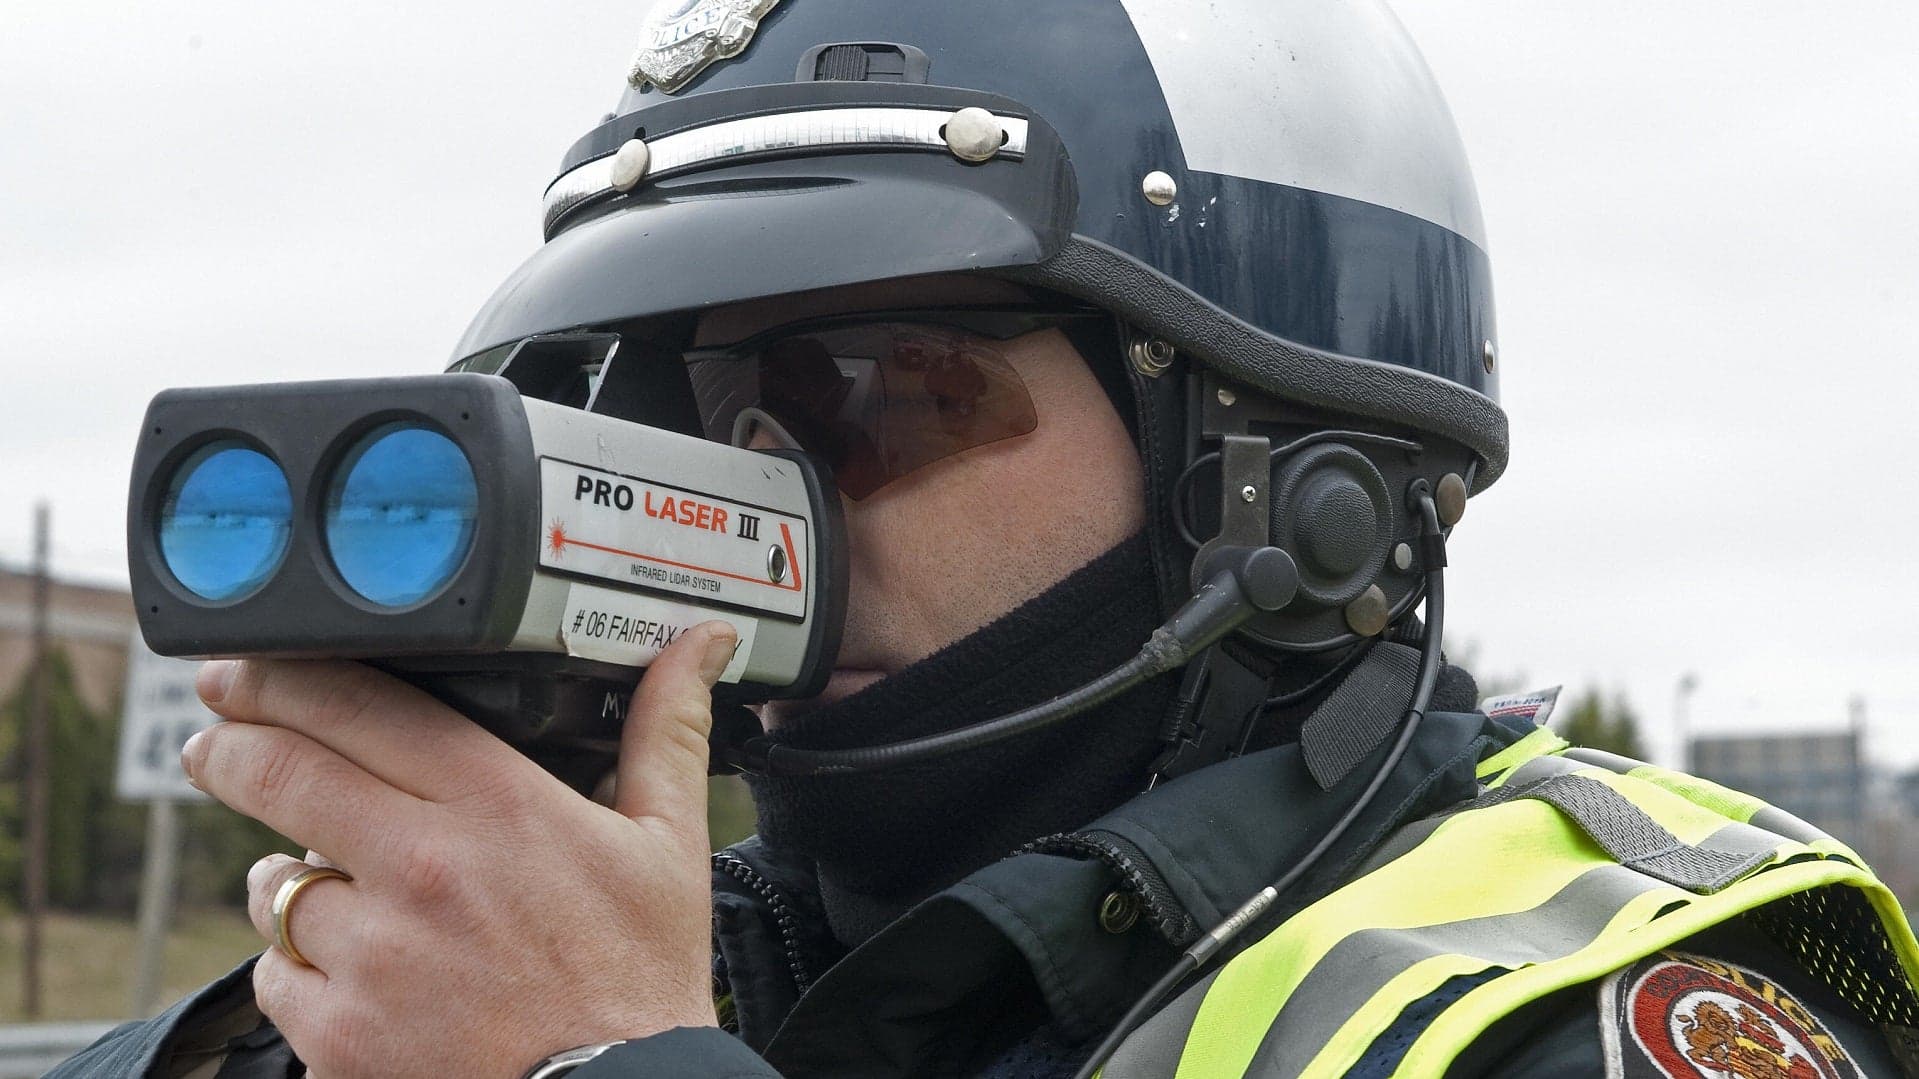 Speeders in Estonia Were Given Time-Outs Instead of Fines